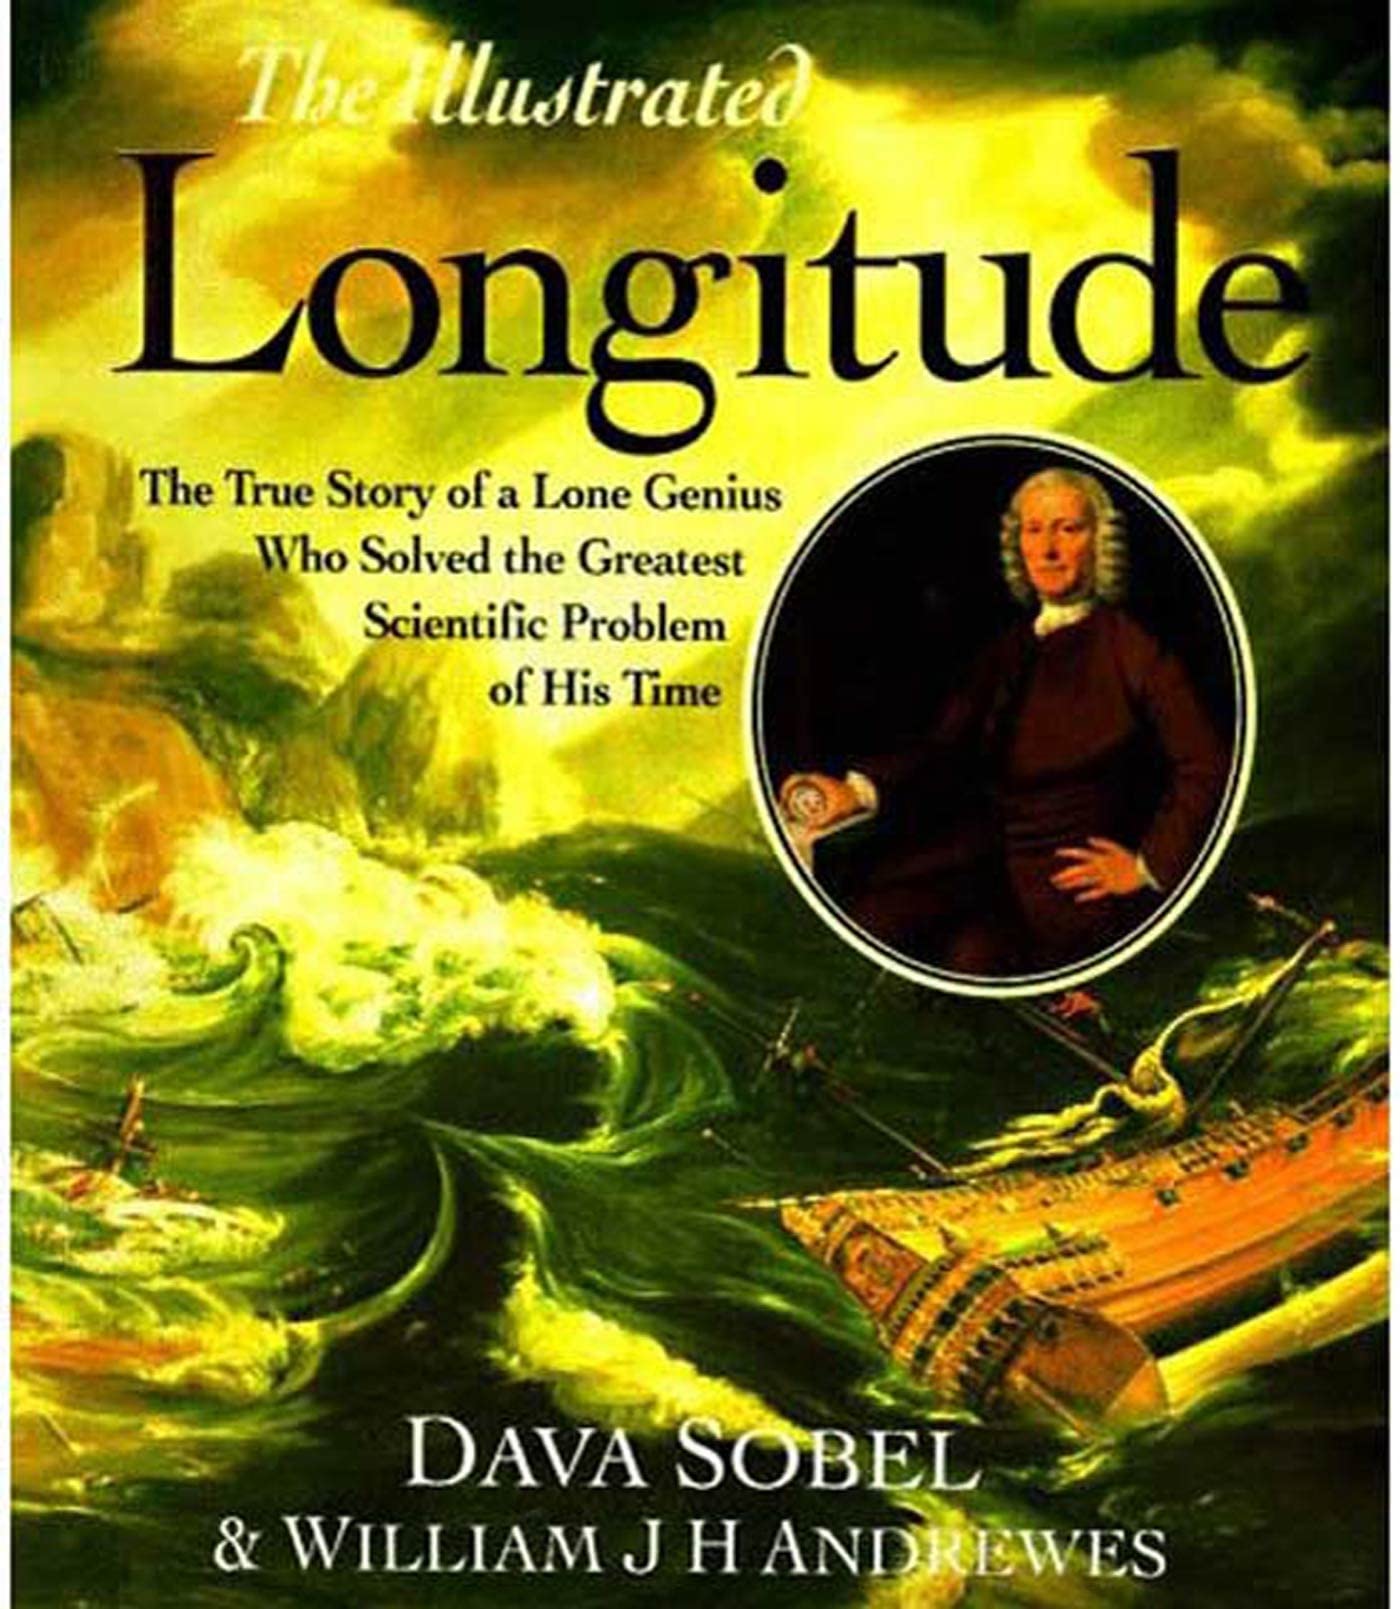 The Illustrated Longitude: The True Story of the Lone Genius Who Solved the Greatest Scientific Problem of His Time